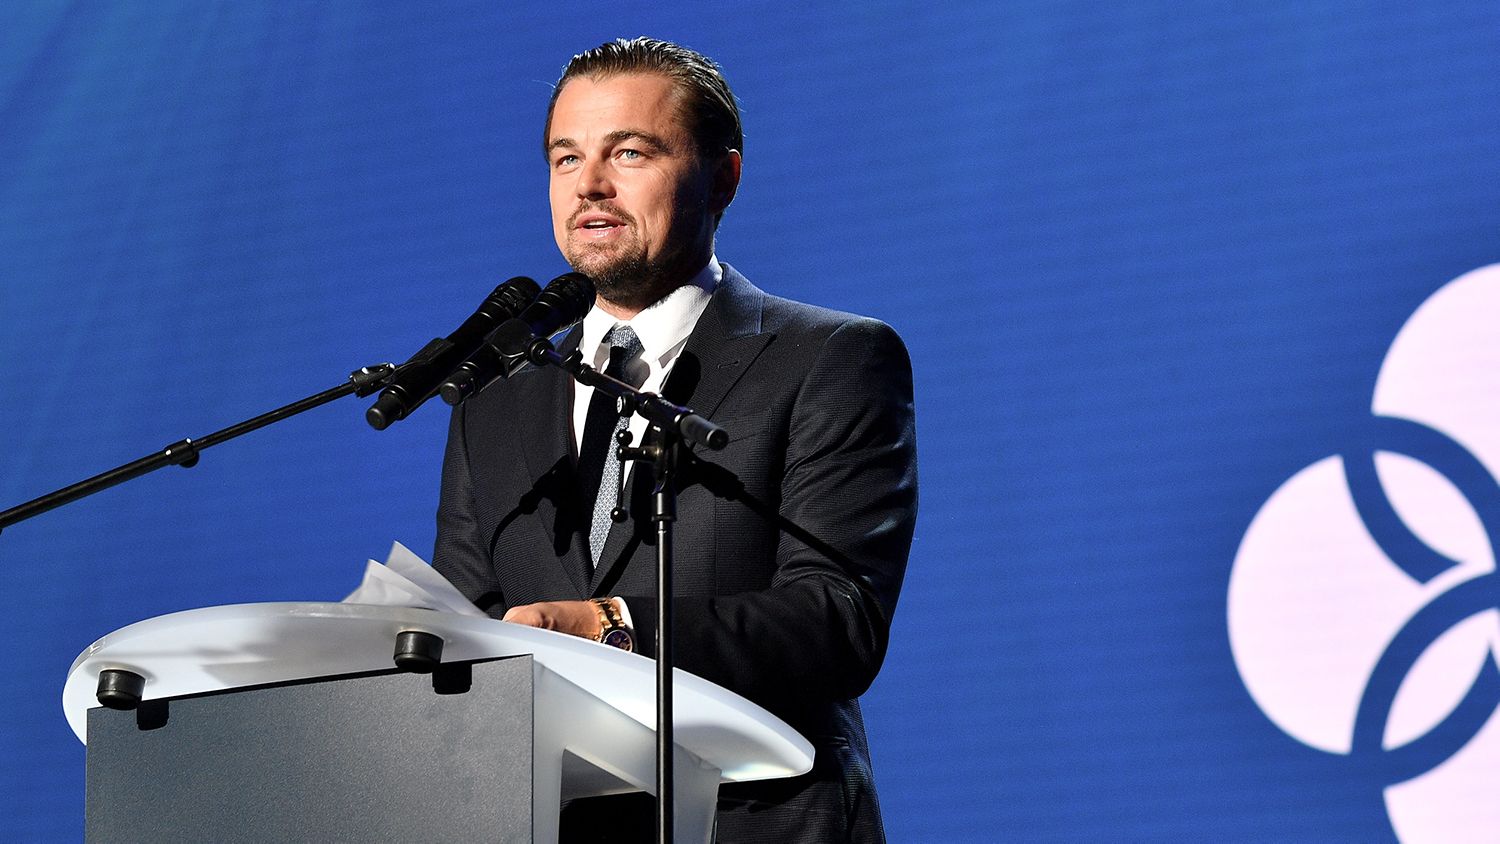 Image shows Leonardo DiCaprio delivering a speech during a climate conference in Paris